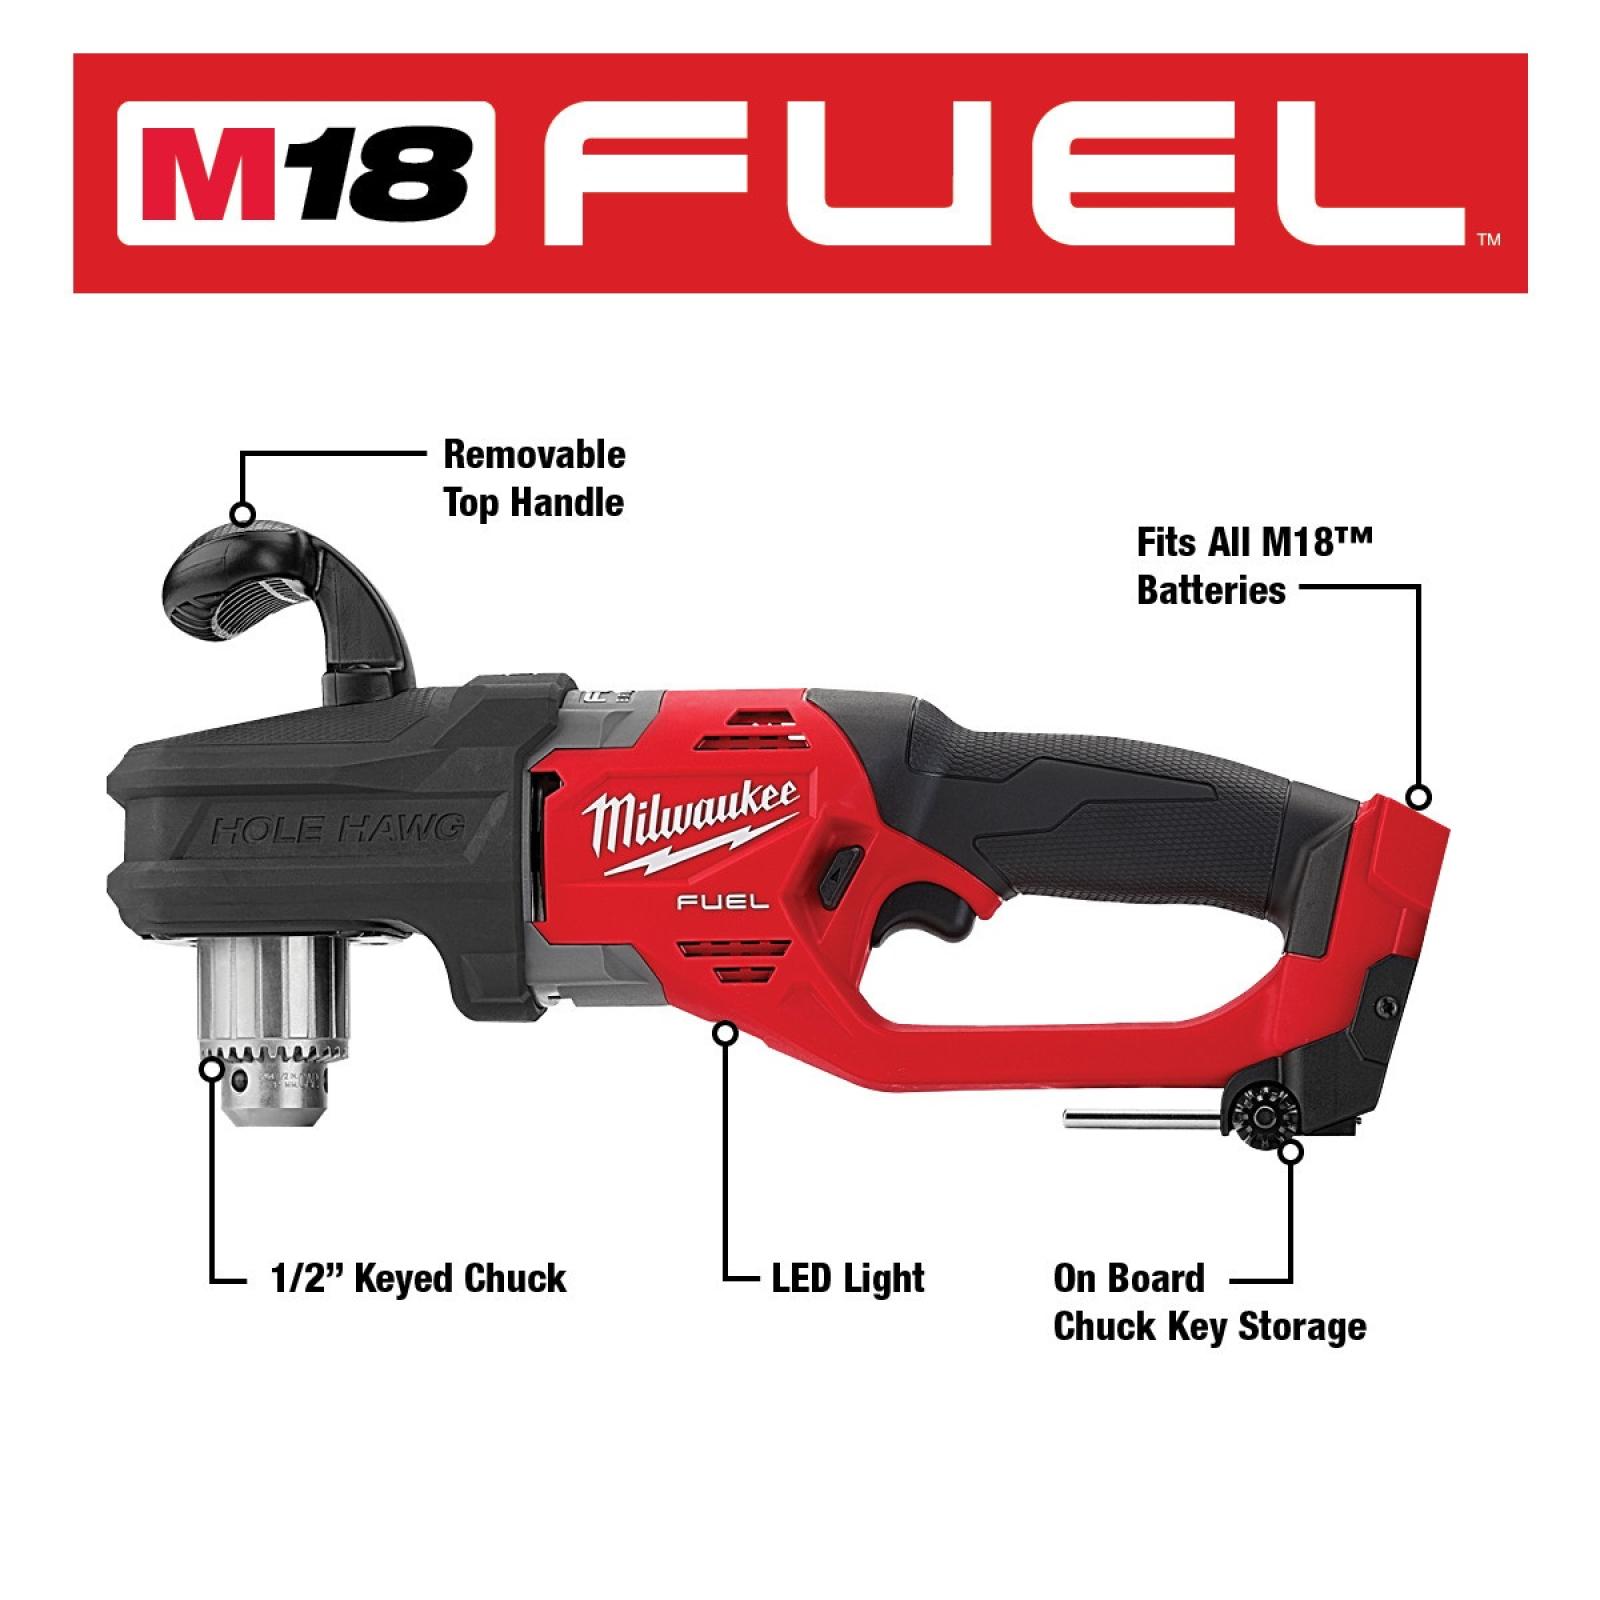 Milwaukee M18 Fuel HOLE HAWG 1/2" Right Angle Drill